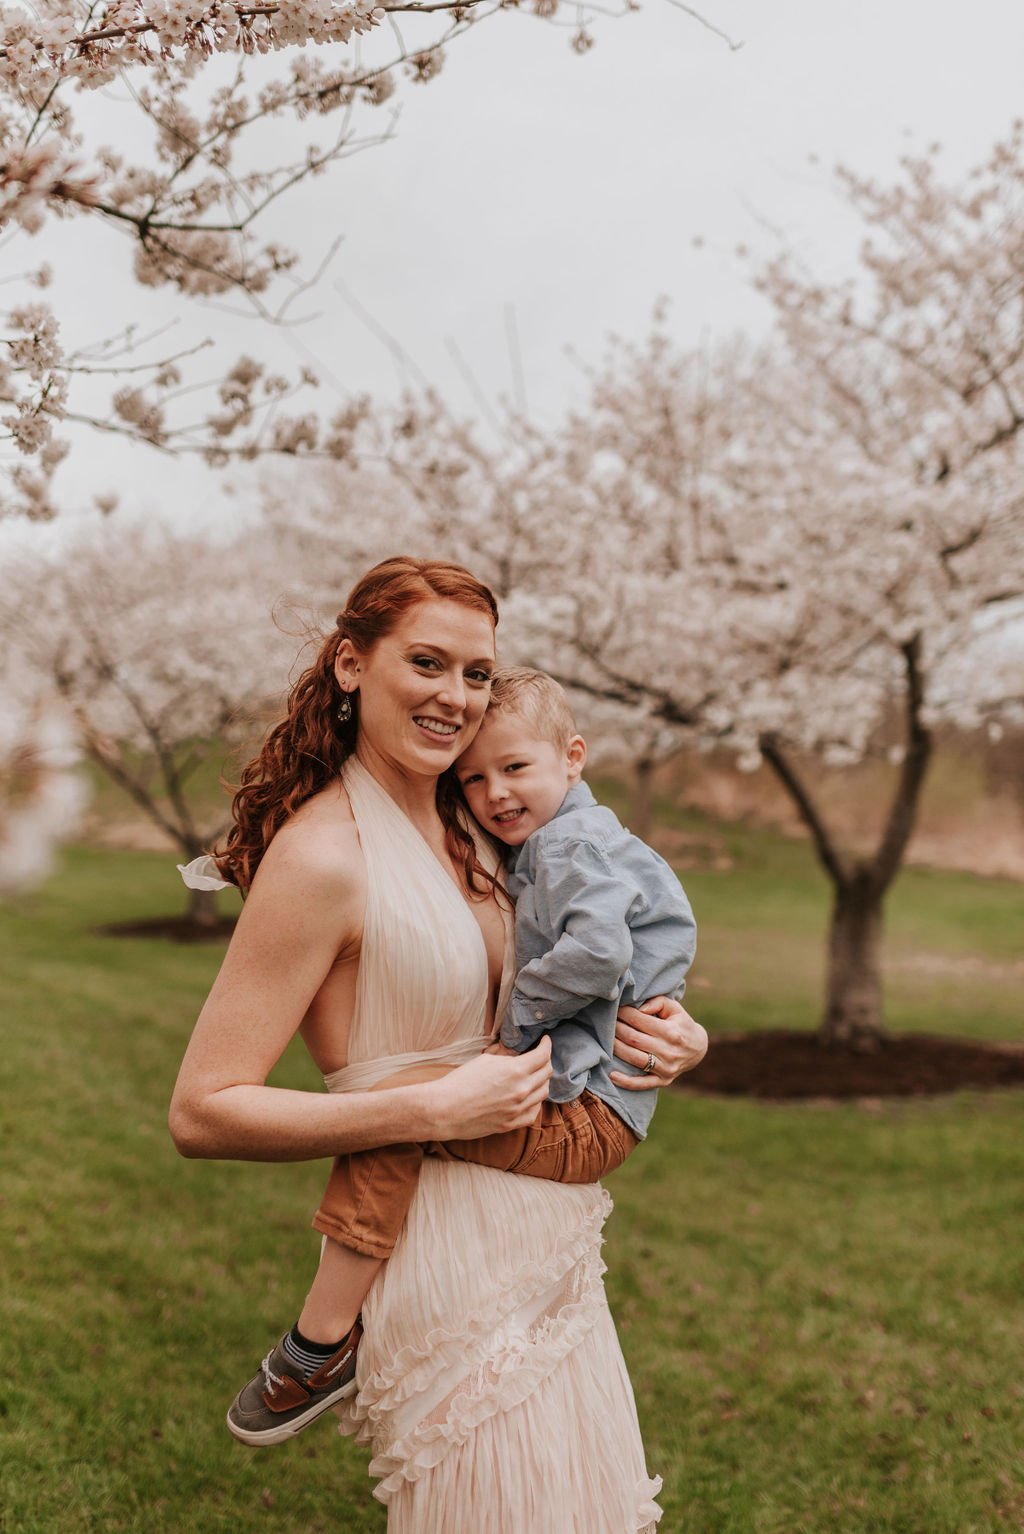 cleveland-ohio-family-mother-daughter-son-outdoor-spring-session-flower-cherry-blossoms10.jpg